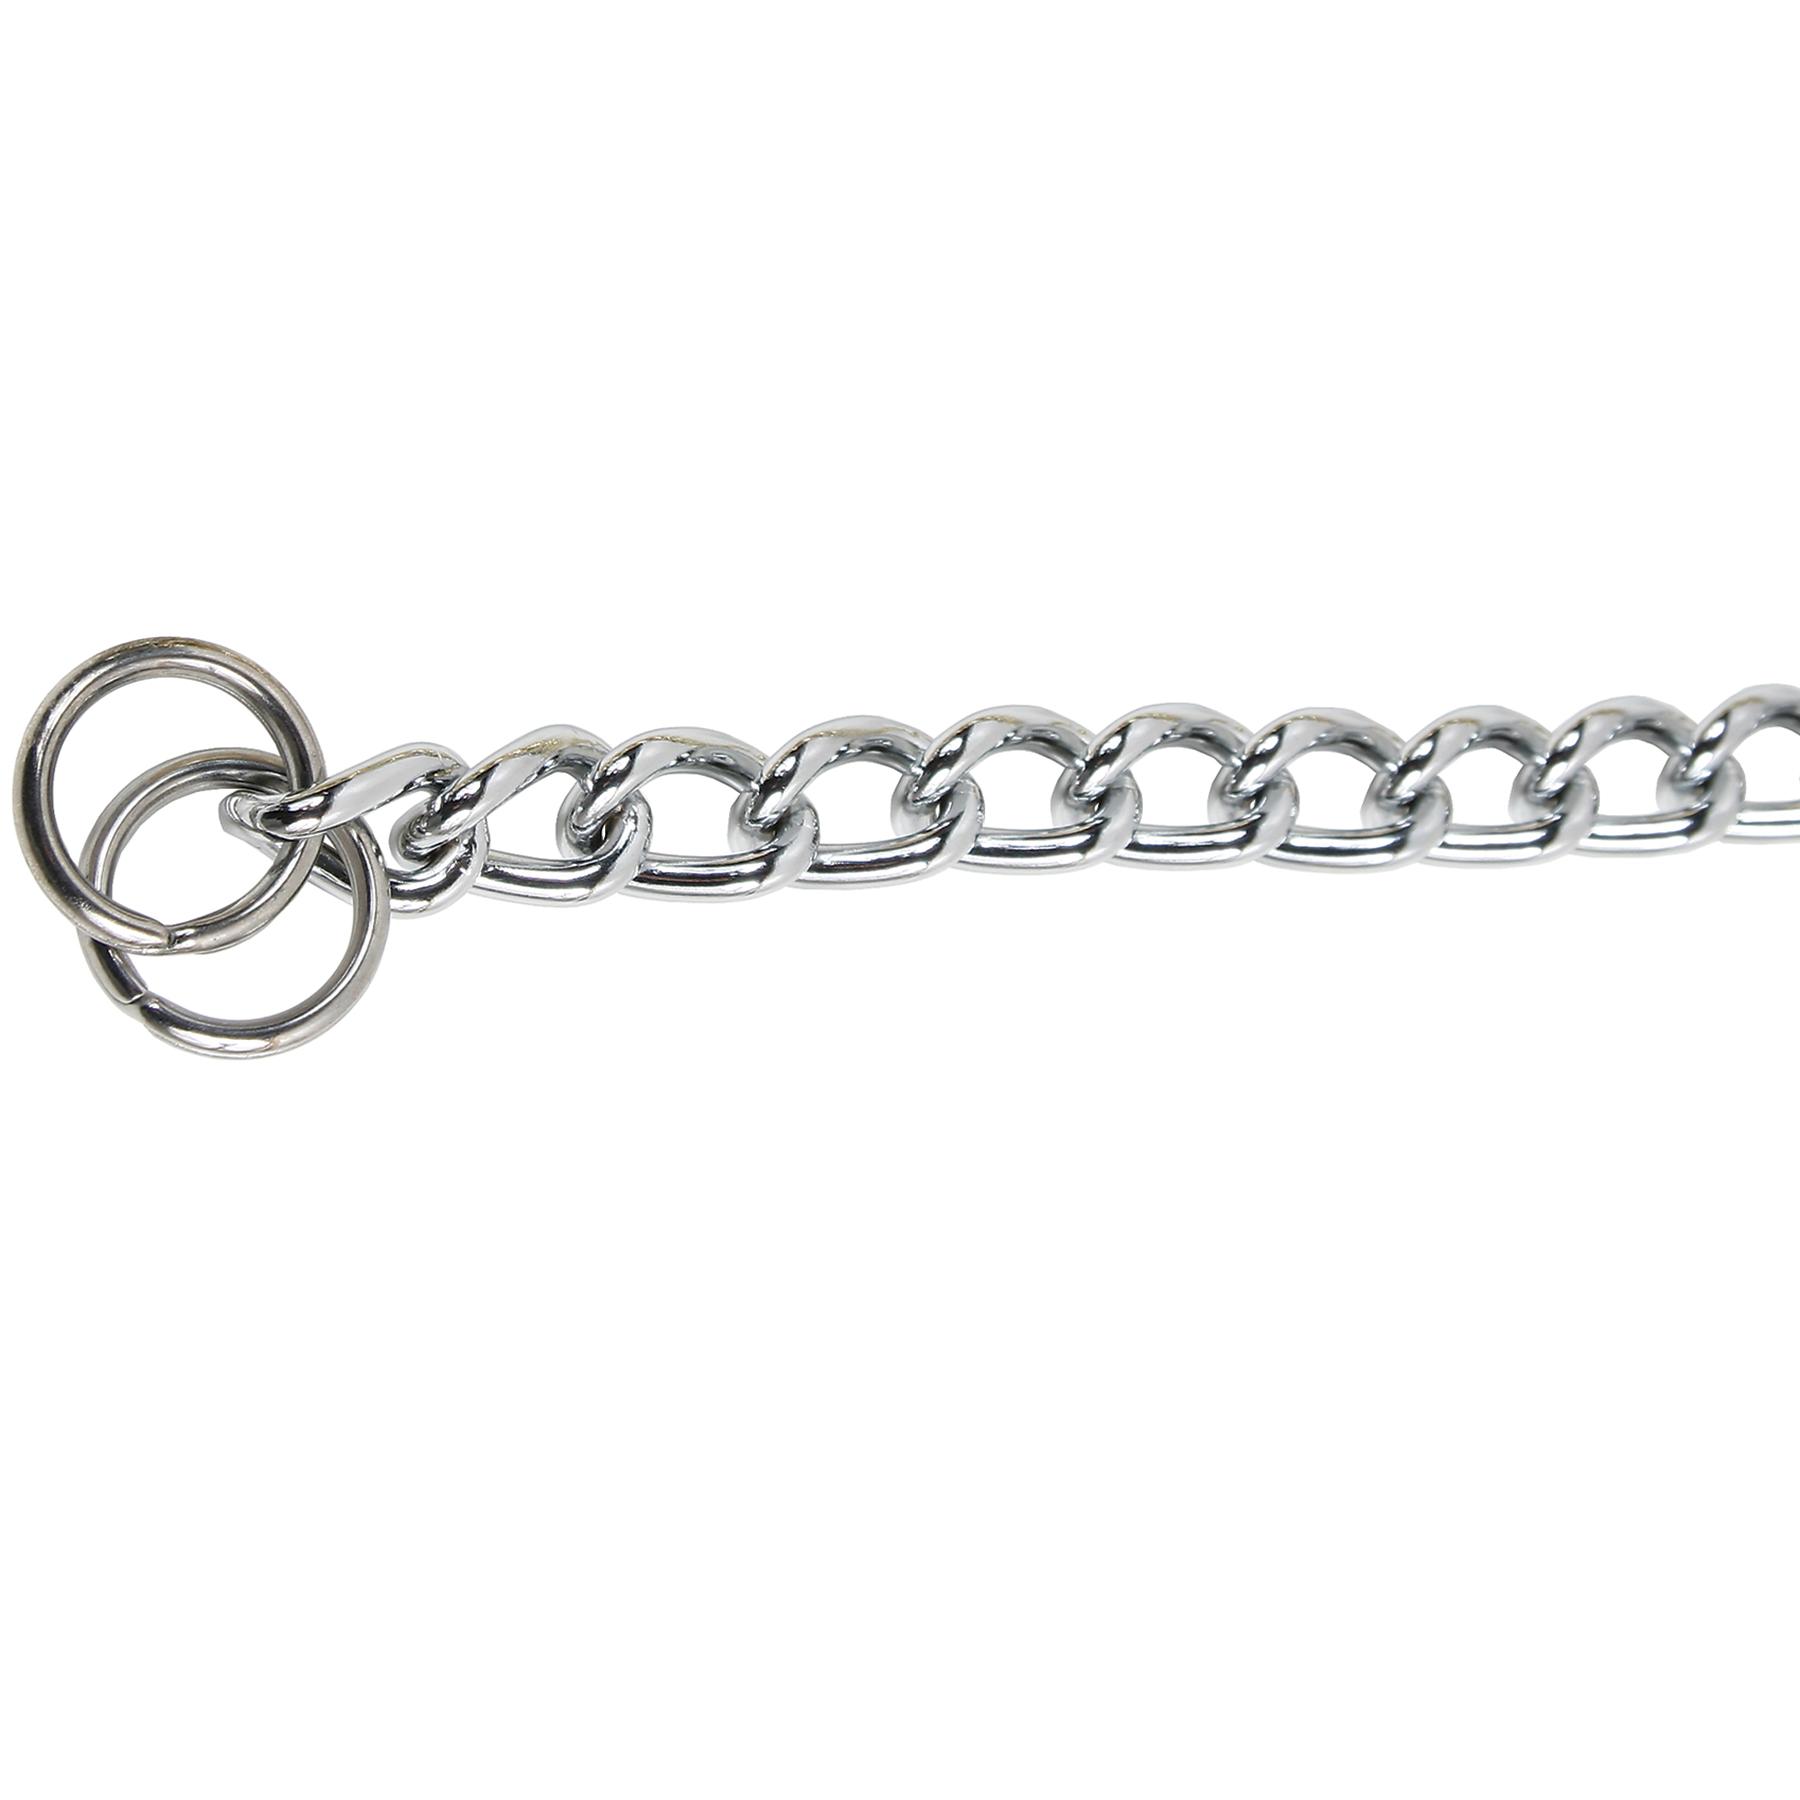 ai02541 Heavy Link Argon Weld Arab Show Chain with Keyring Ends